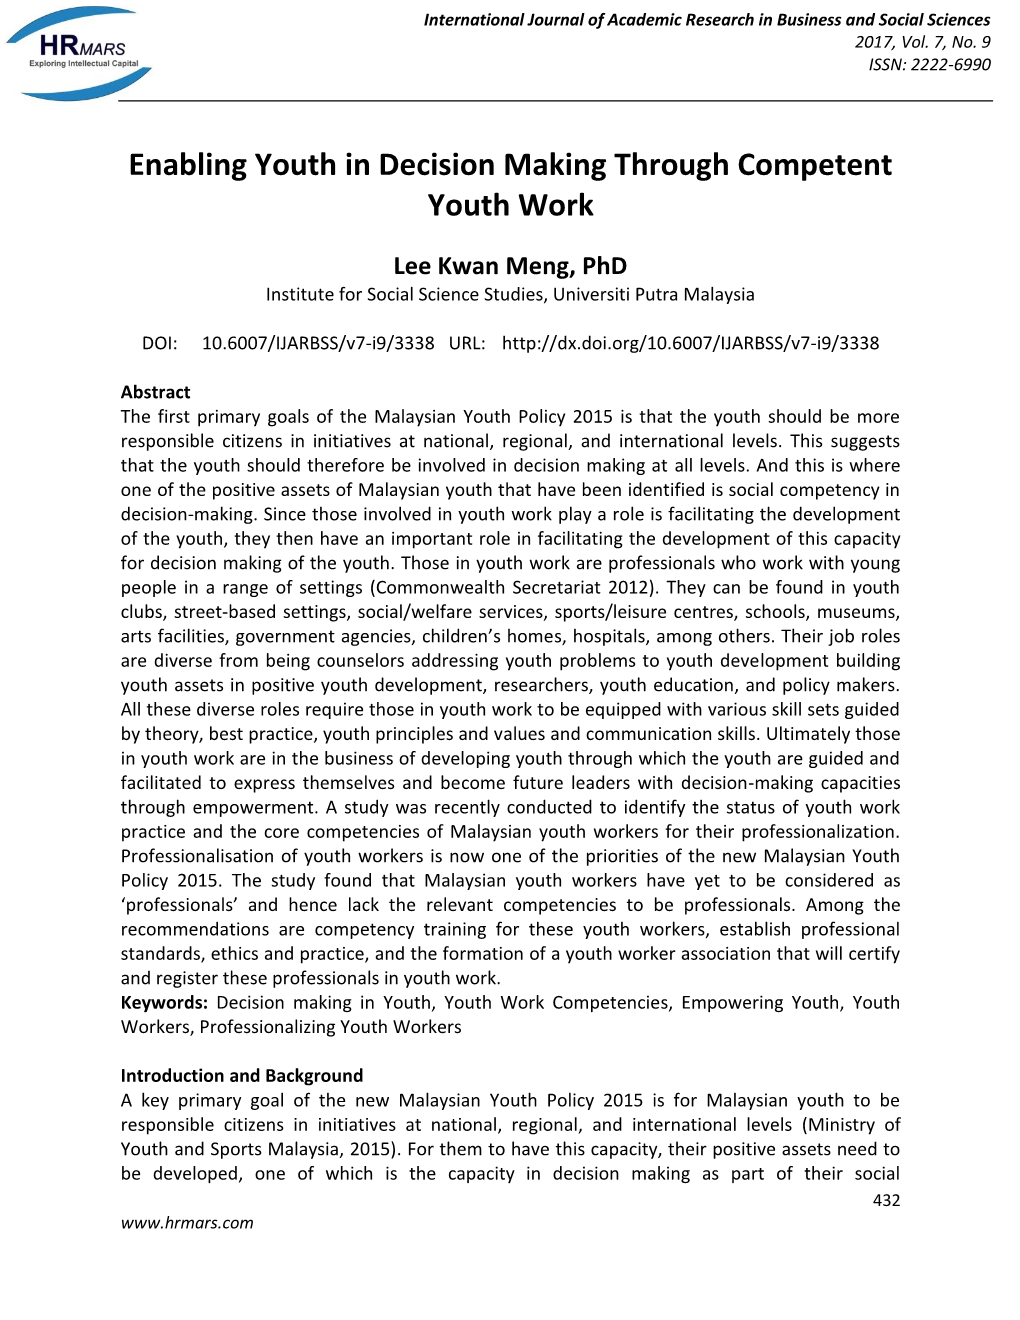 Enabling Youth in Decision Making Through Competent Youth Work